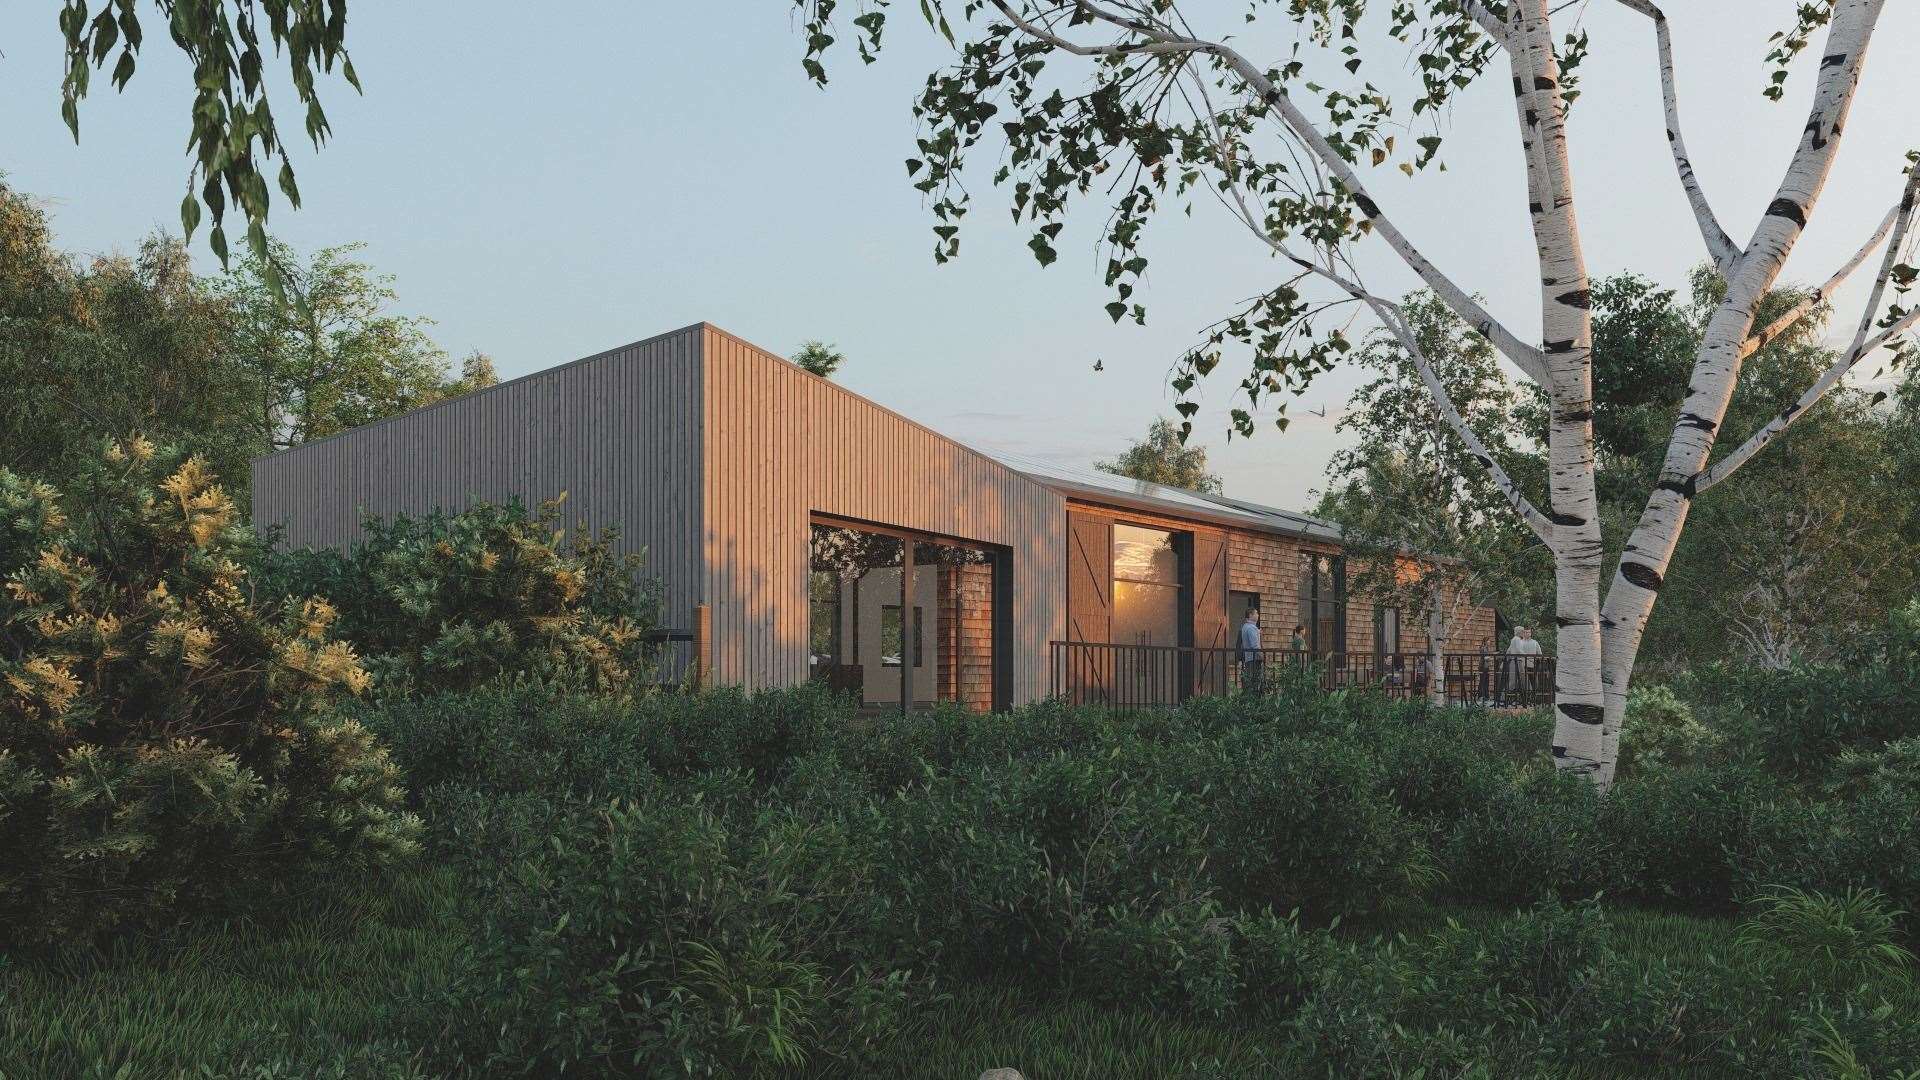 There are plans to improve the Sevenoaks Kent Wildlife Trust centre